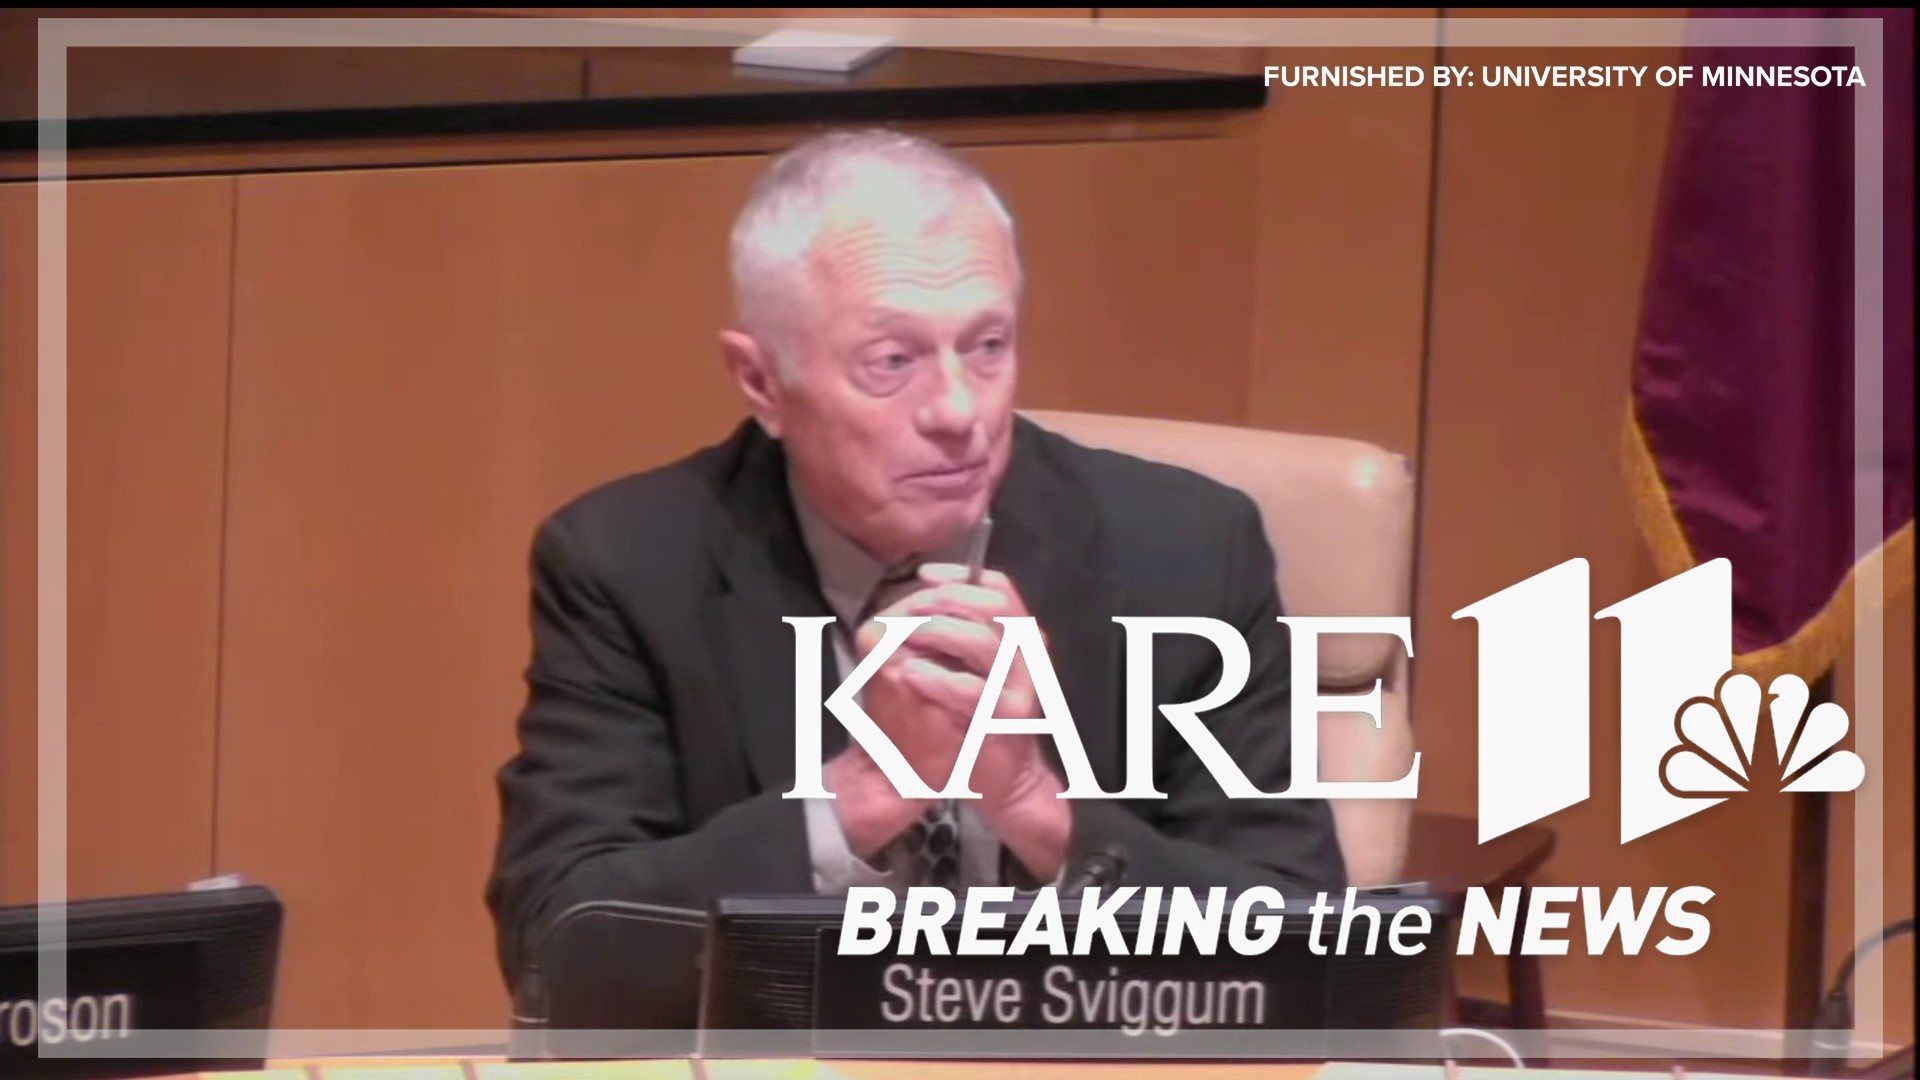 Vice Chair Steve Sviggum told KARE 11 his comments in last week's Board meeting were "not meant as racist."